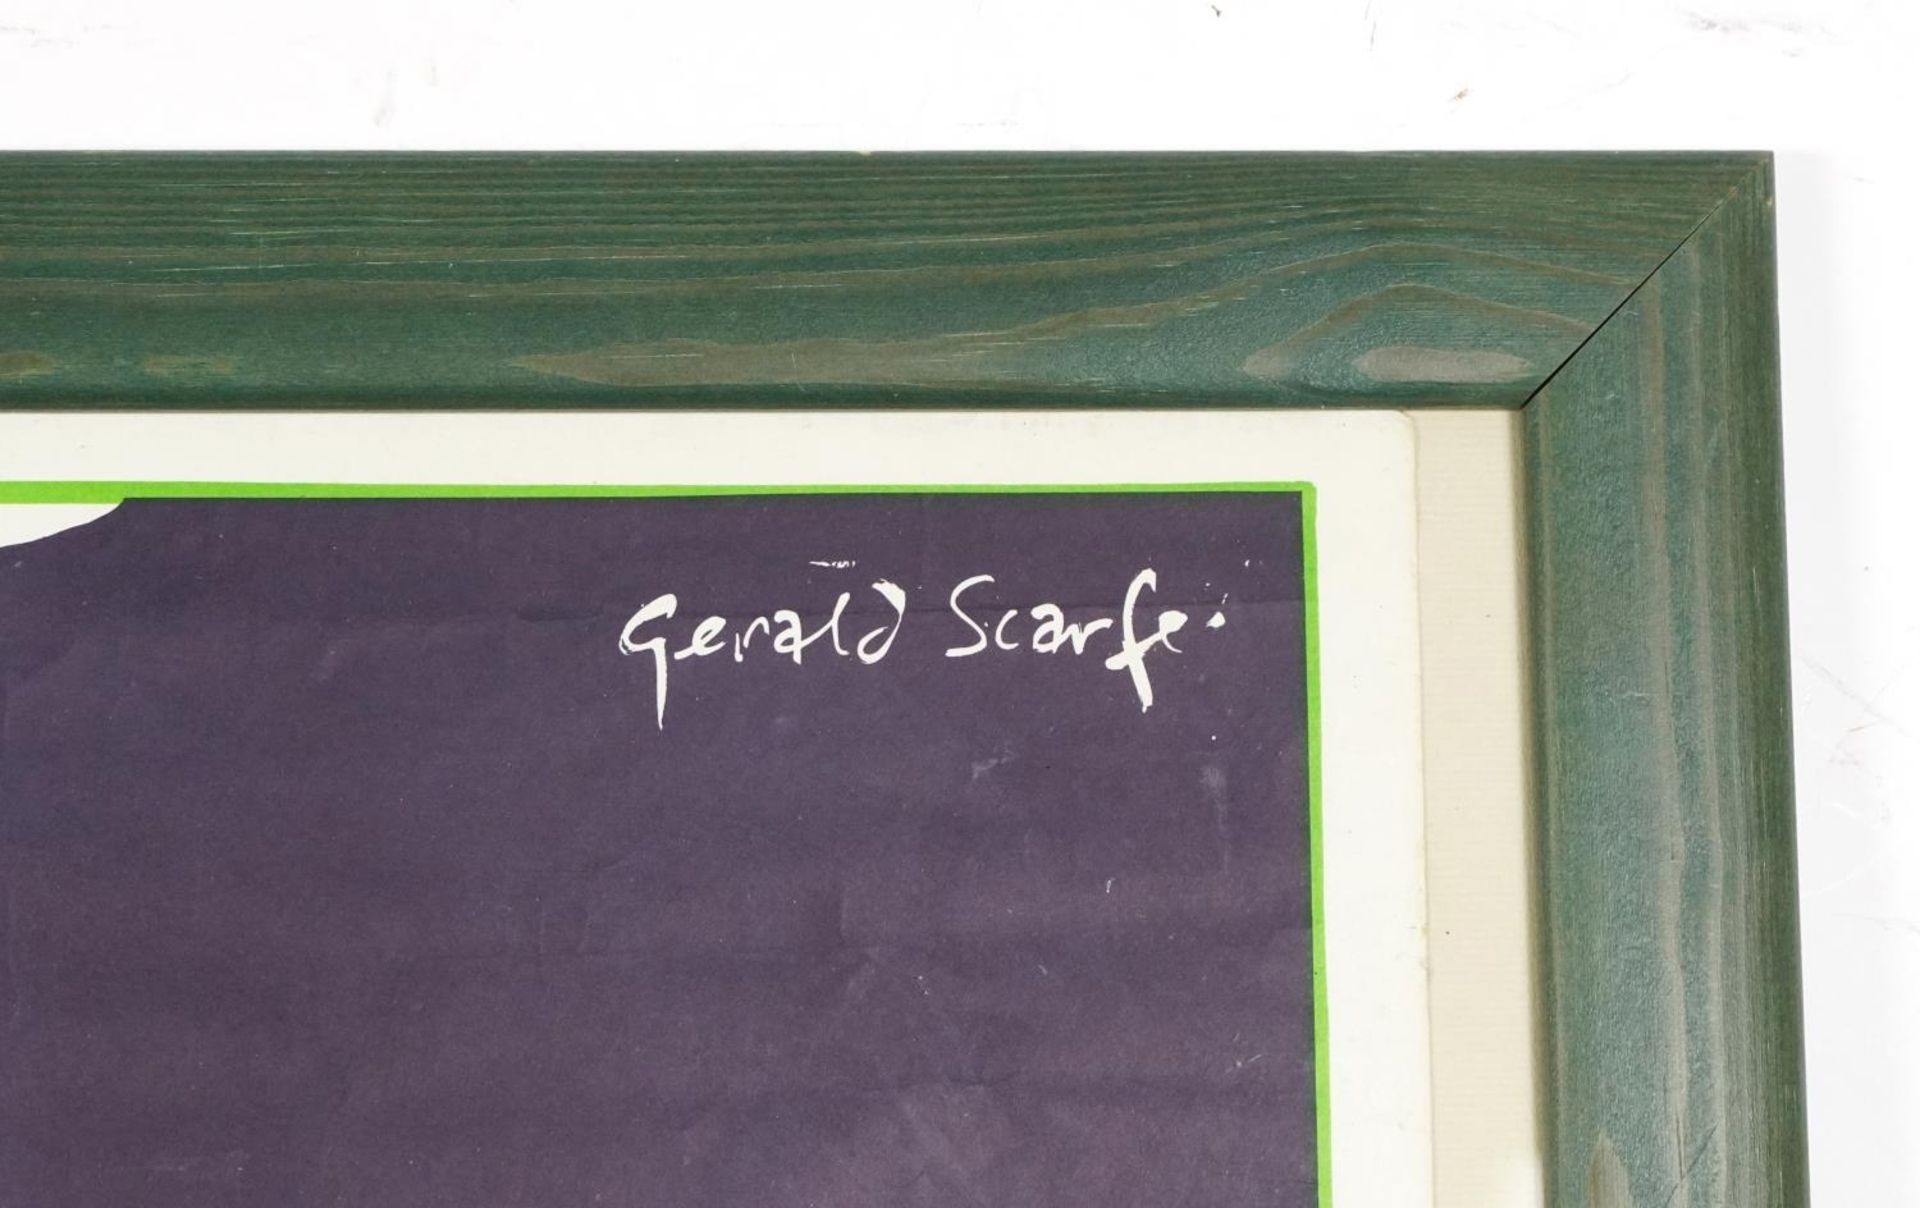 Gerald Scarf - BBC Radio, signed poster, limited edition 3/100, with embossed watermark, framed - Image 3 of 5